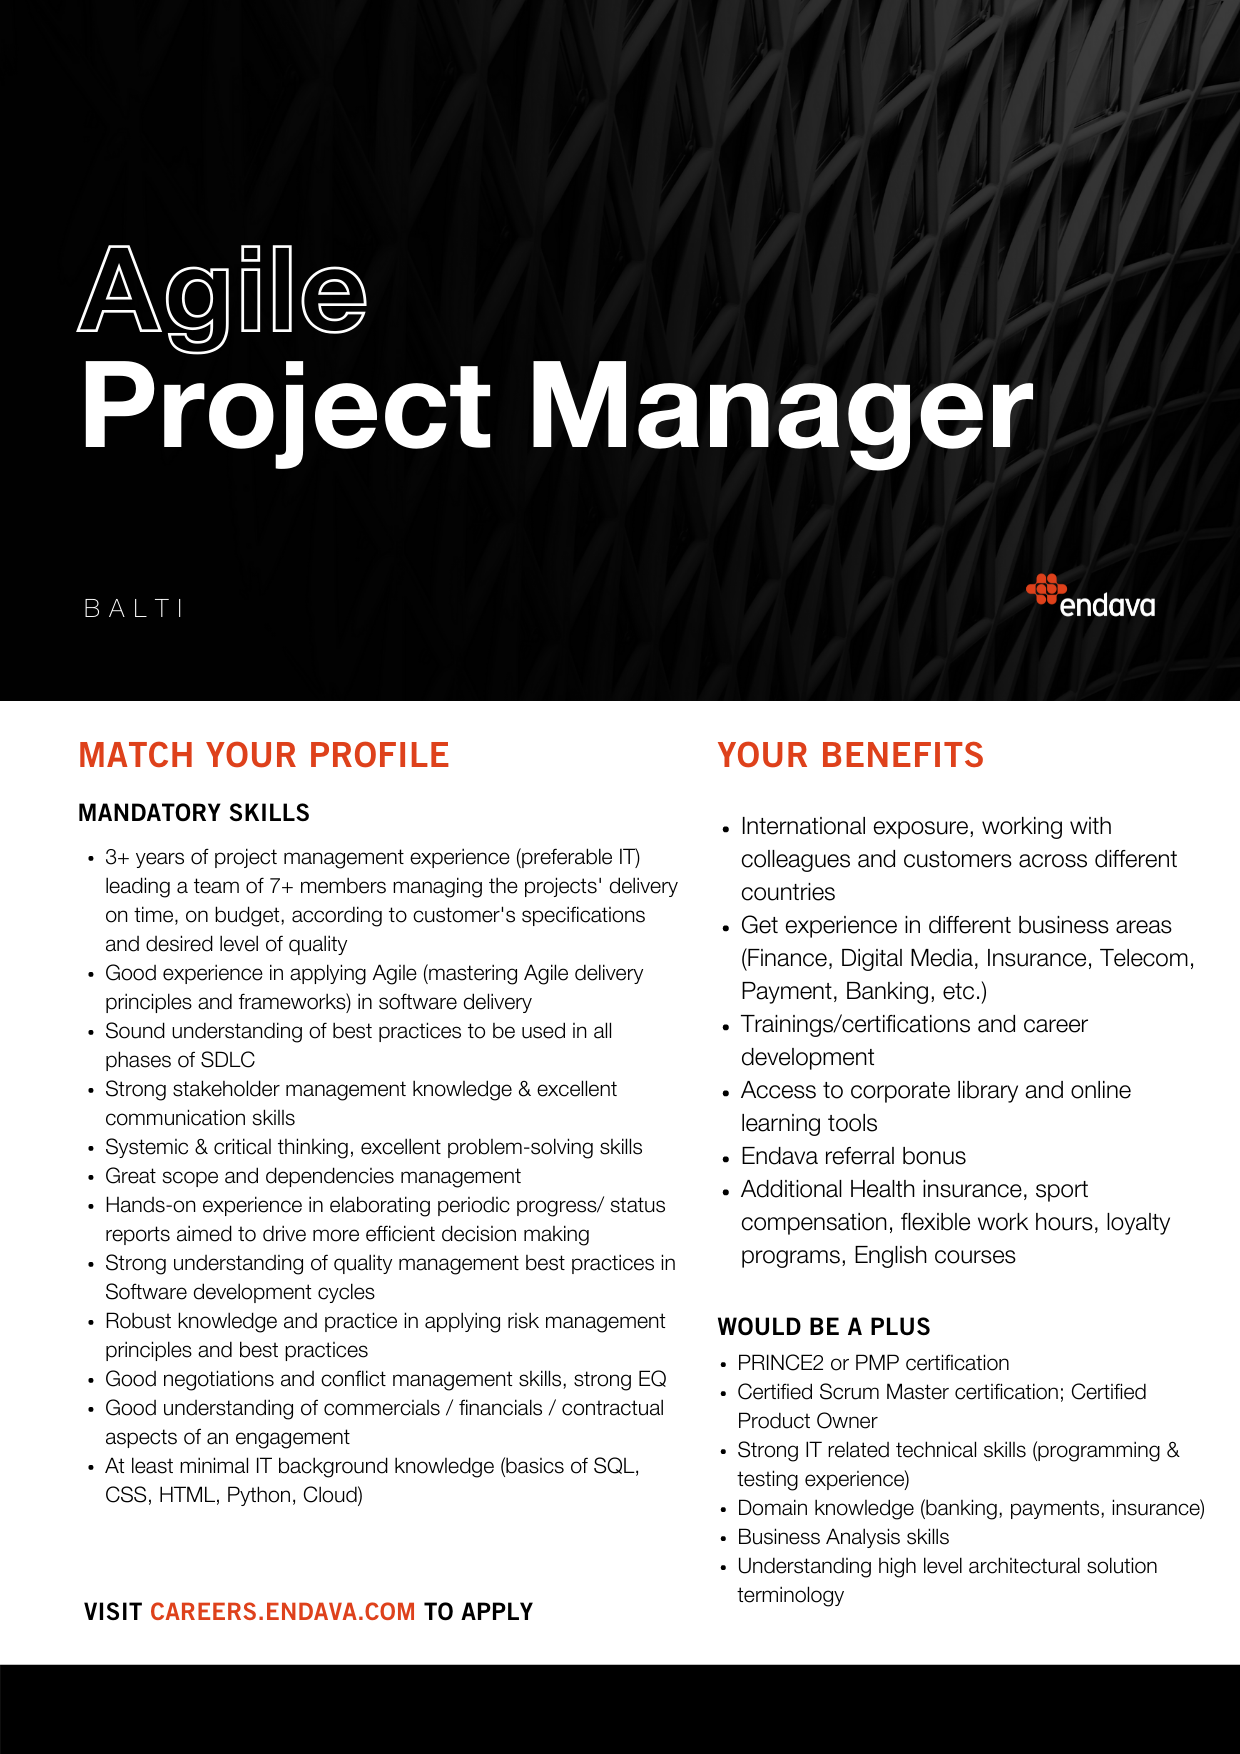 Agile Project Manager